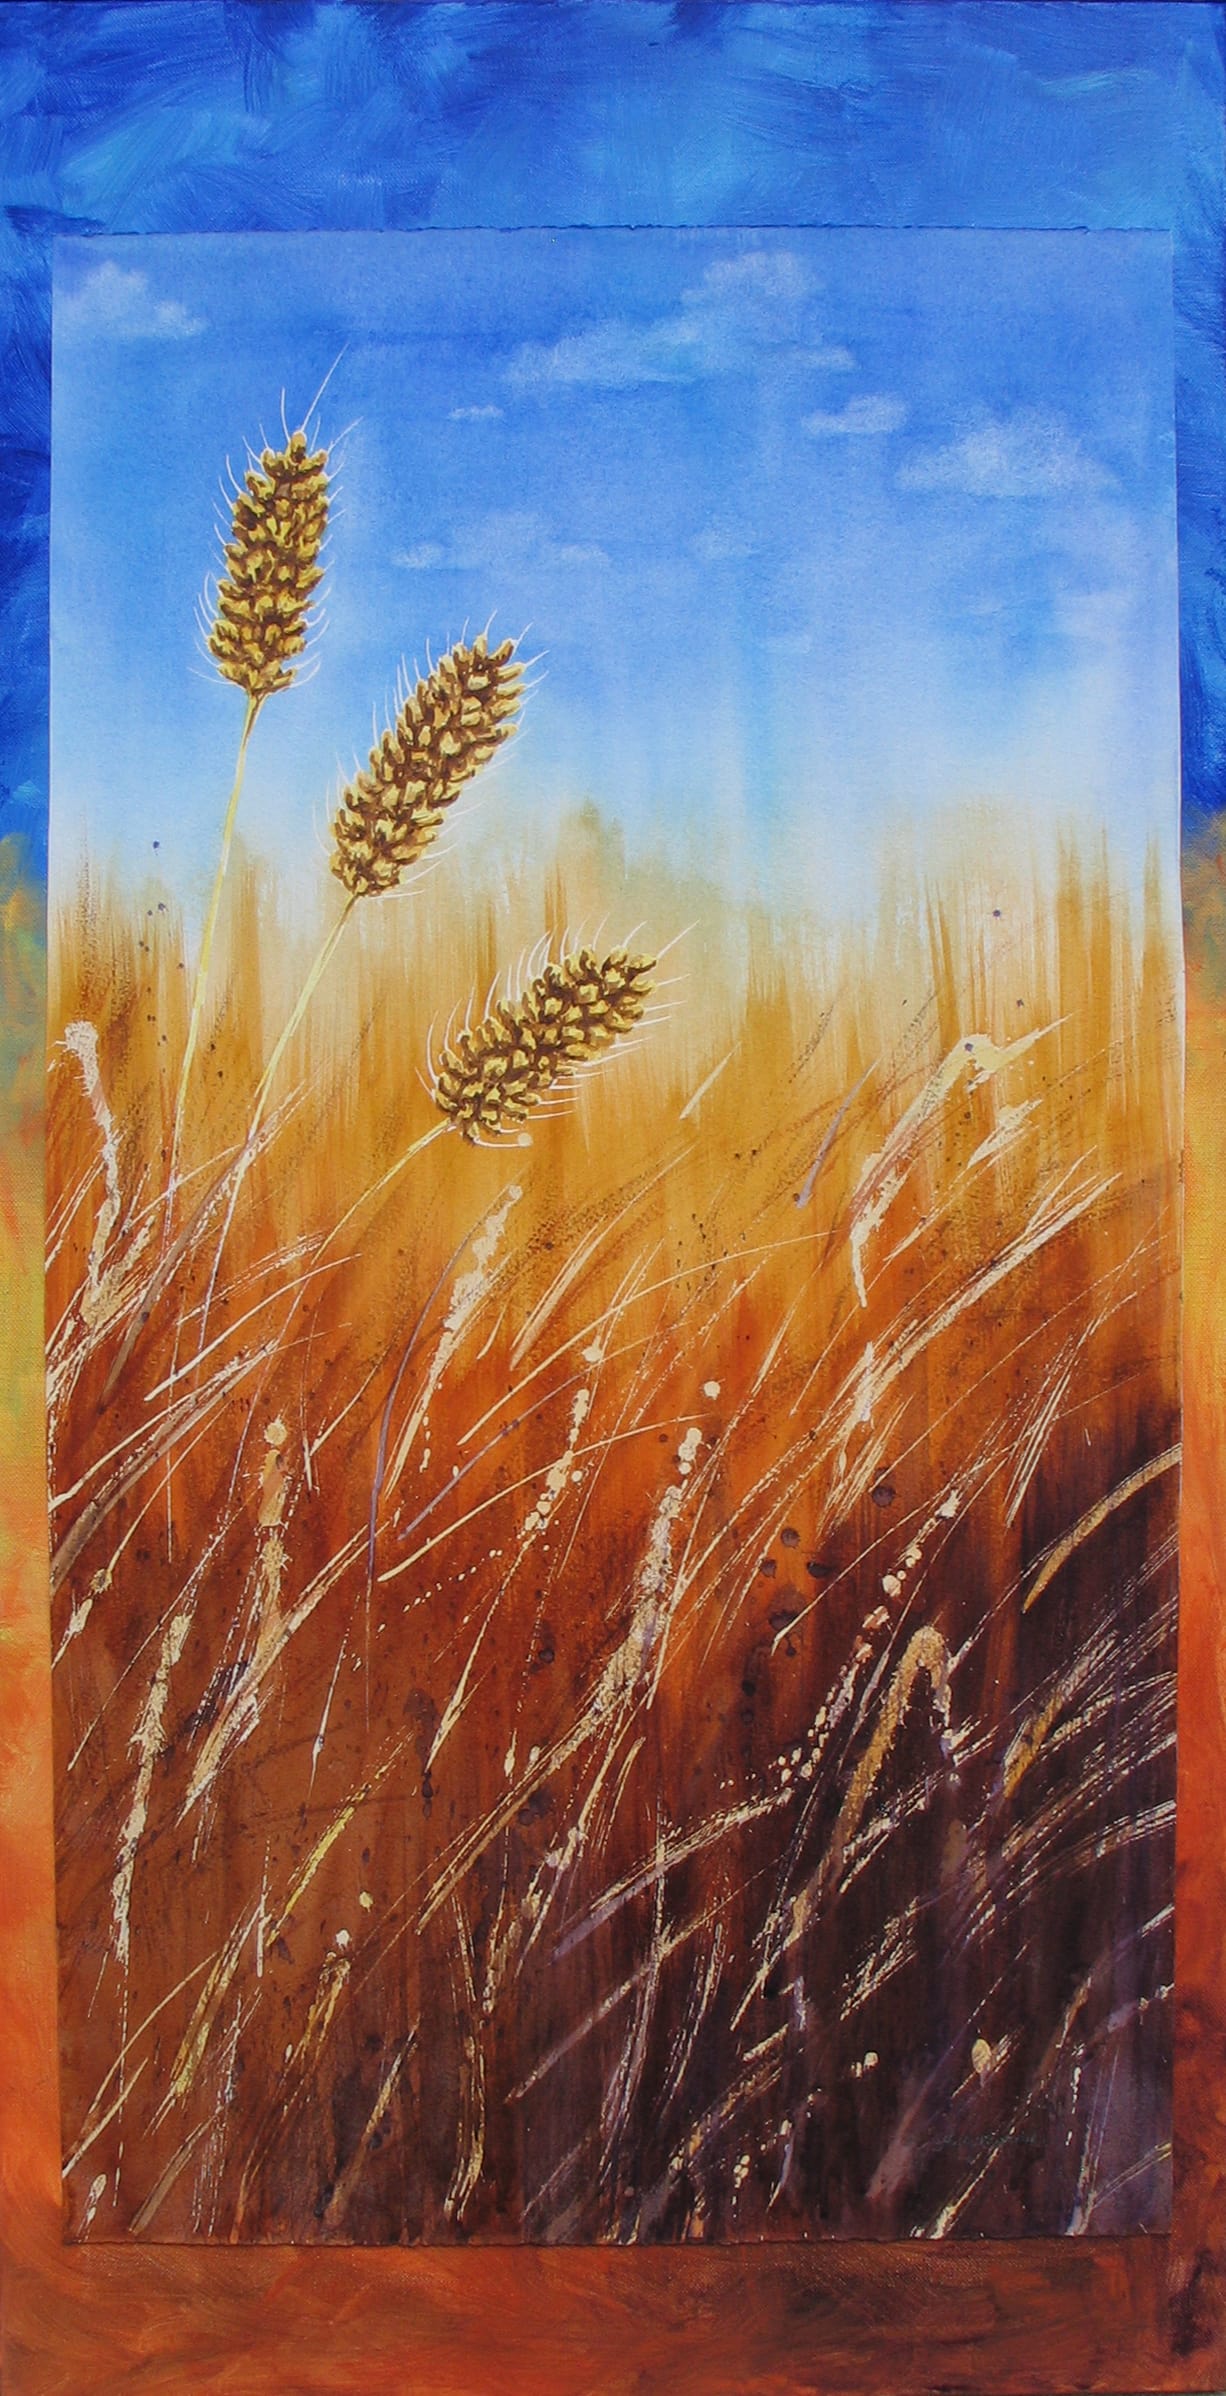 "Kernels of Kindness," by Holly Bustad. Watercolor on paper, featured in the September/October issue of the magazine.